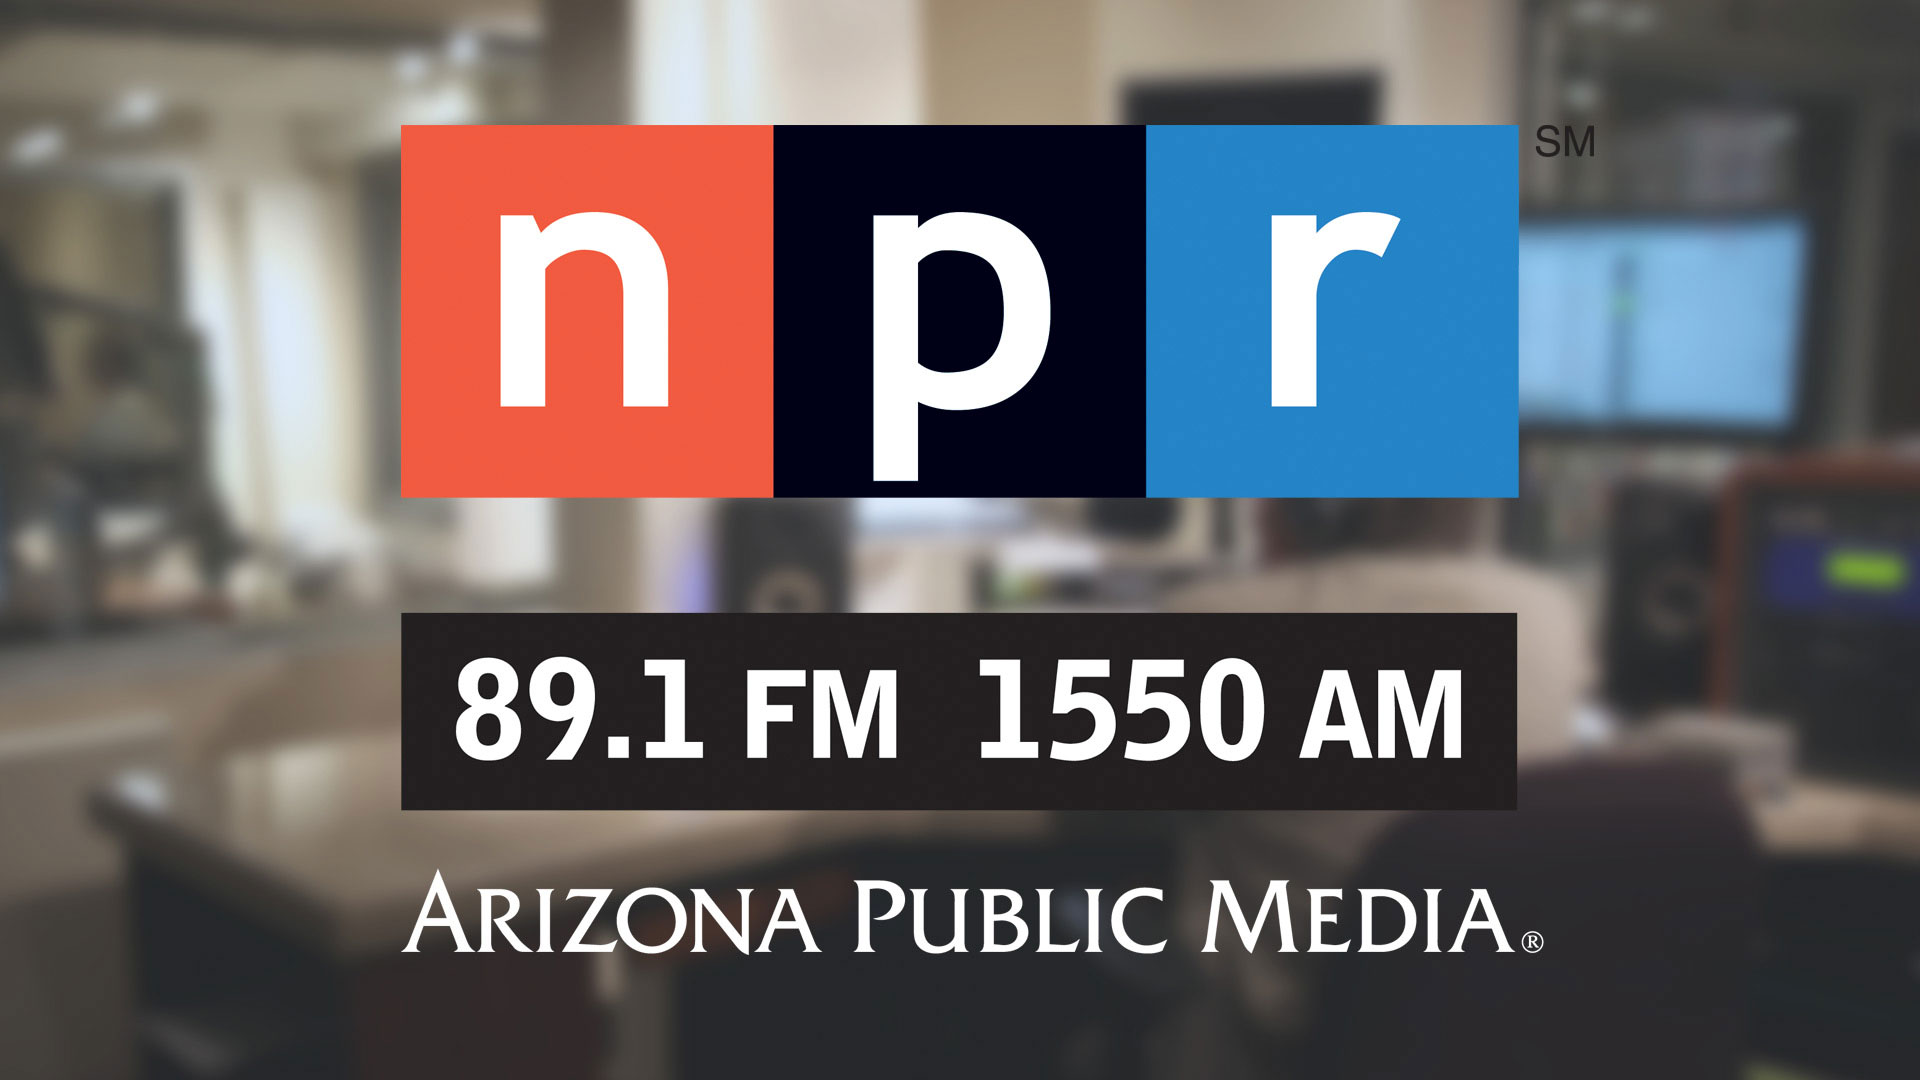 NPR 89.1 is now ranked the #1 radio station in Tucson according to a recent Nielsen Radio Research Report.